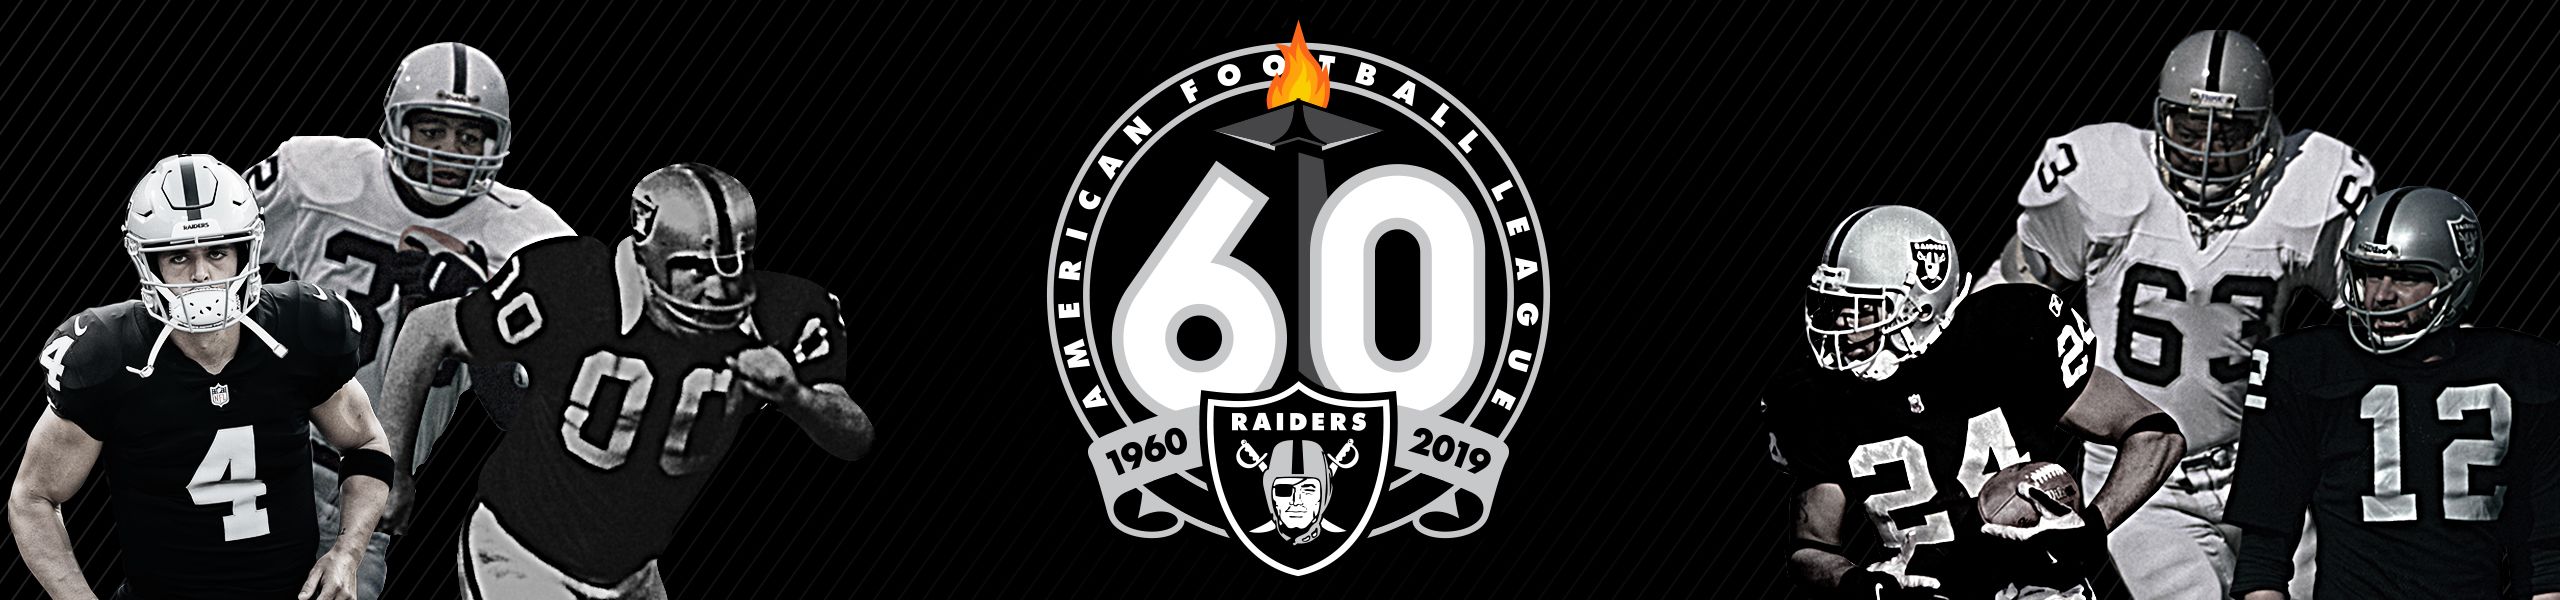 raiders 60 year patch